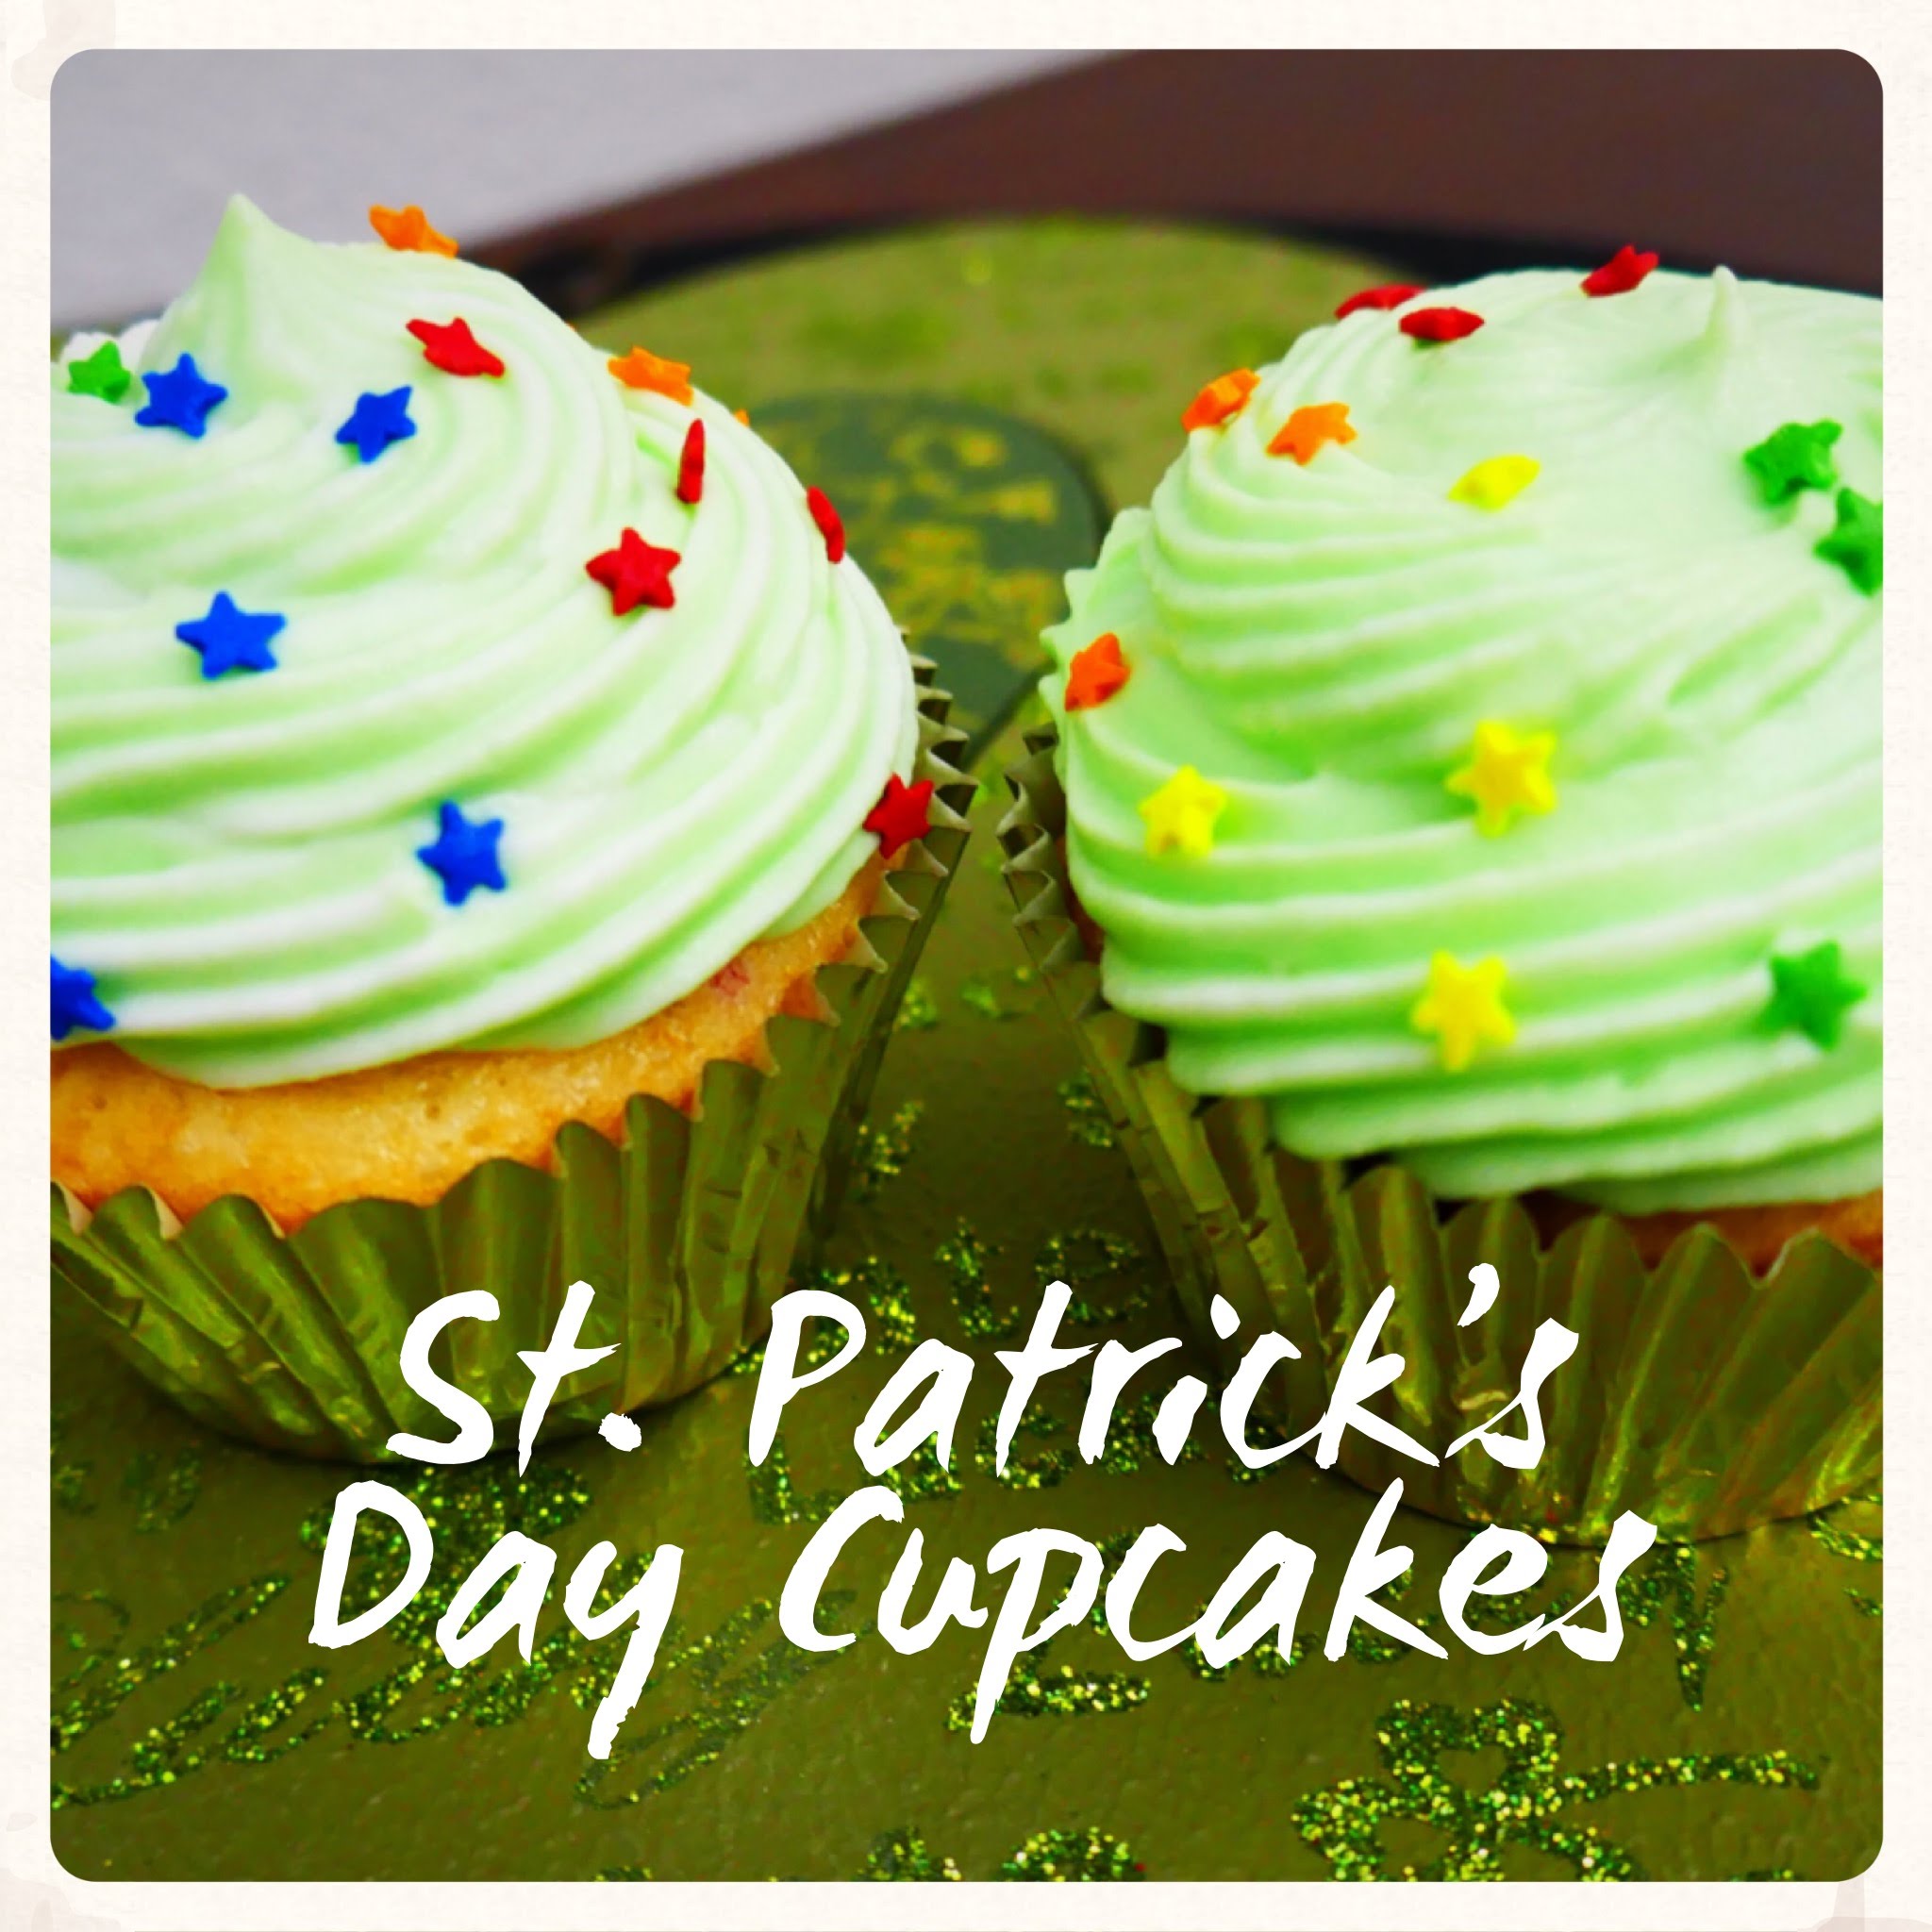 St Patrick's Day Cupcakes title